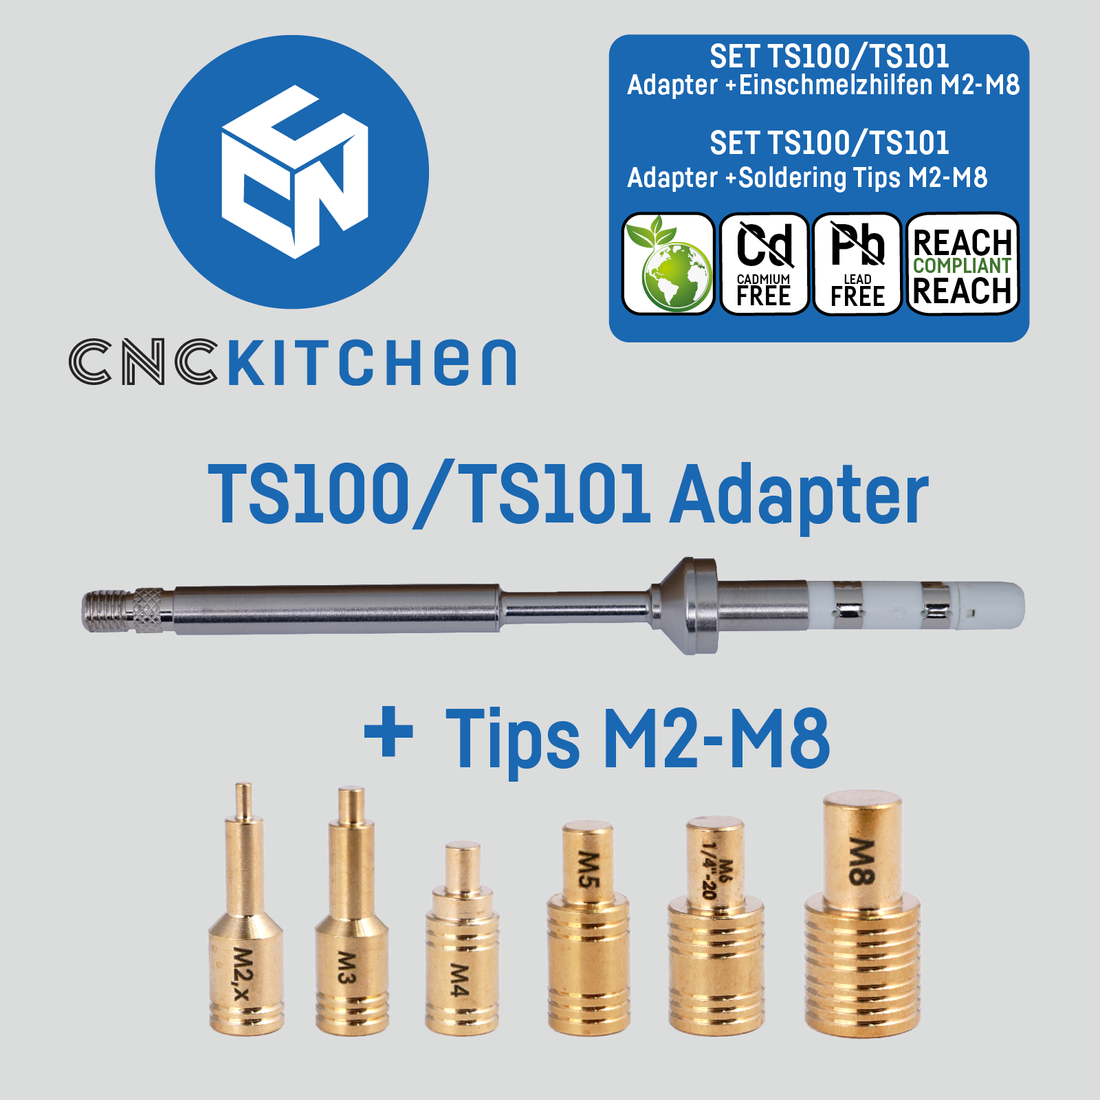  GO-3D M6 0.4mm ZS Nozzle Hardened Steel Copper Alloy